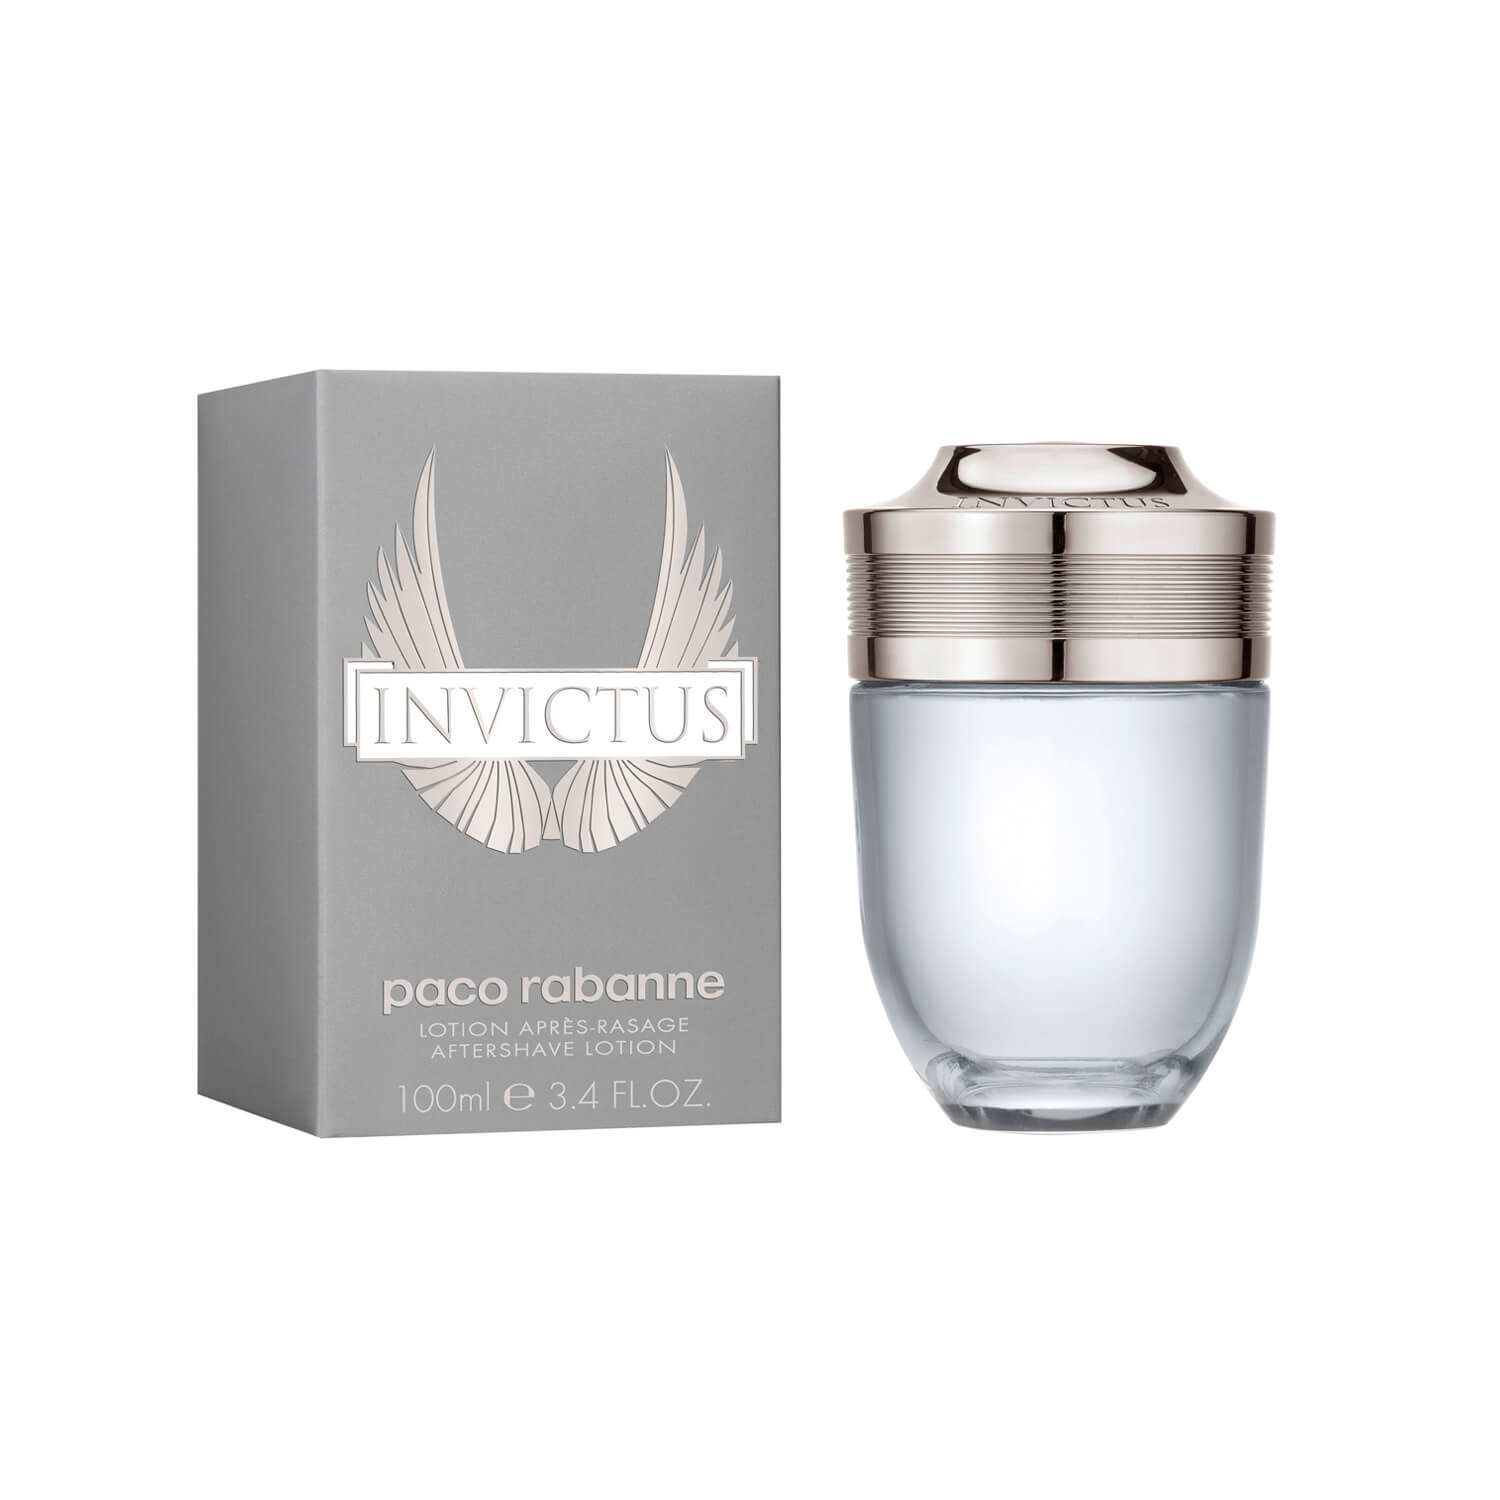 Paco Rabanne Invictus Aftershave Lotion - 100ml 1 Shaws Department Stores